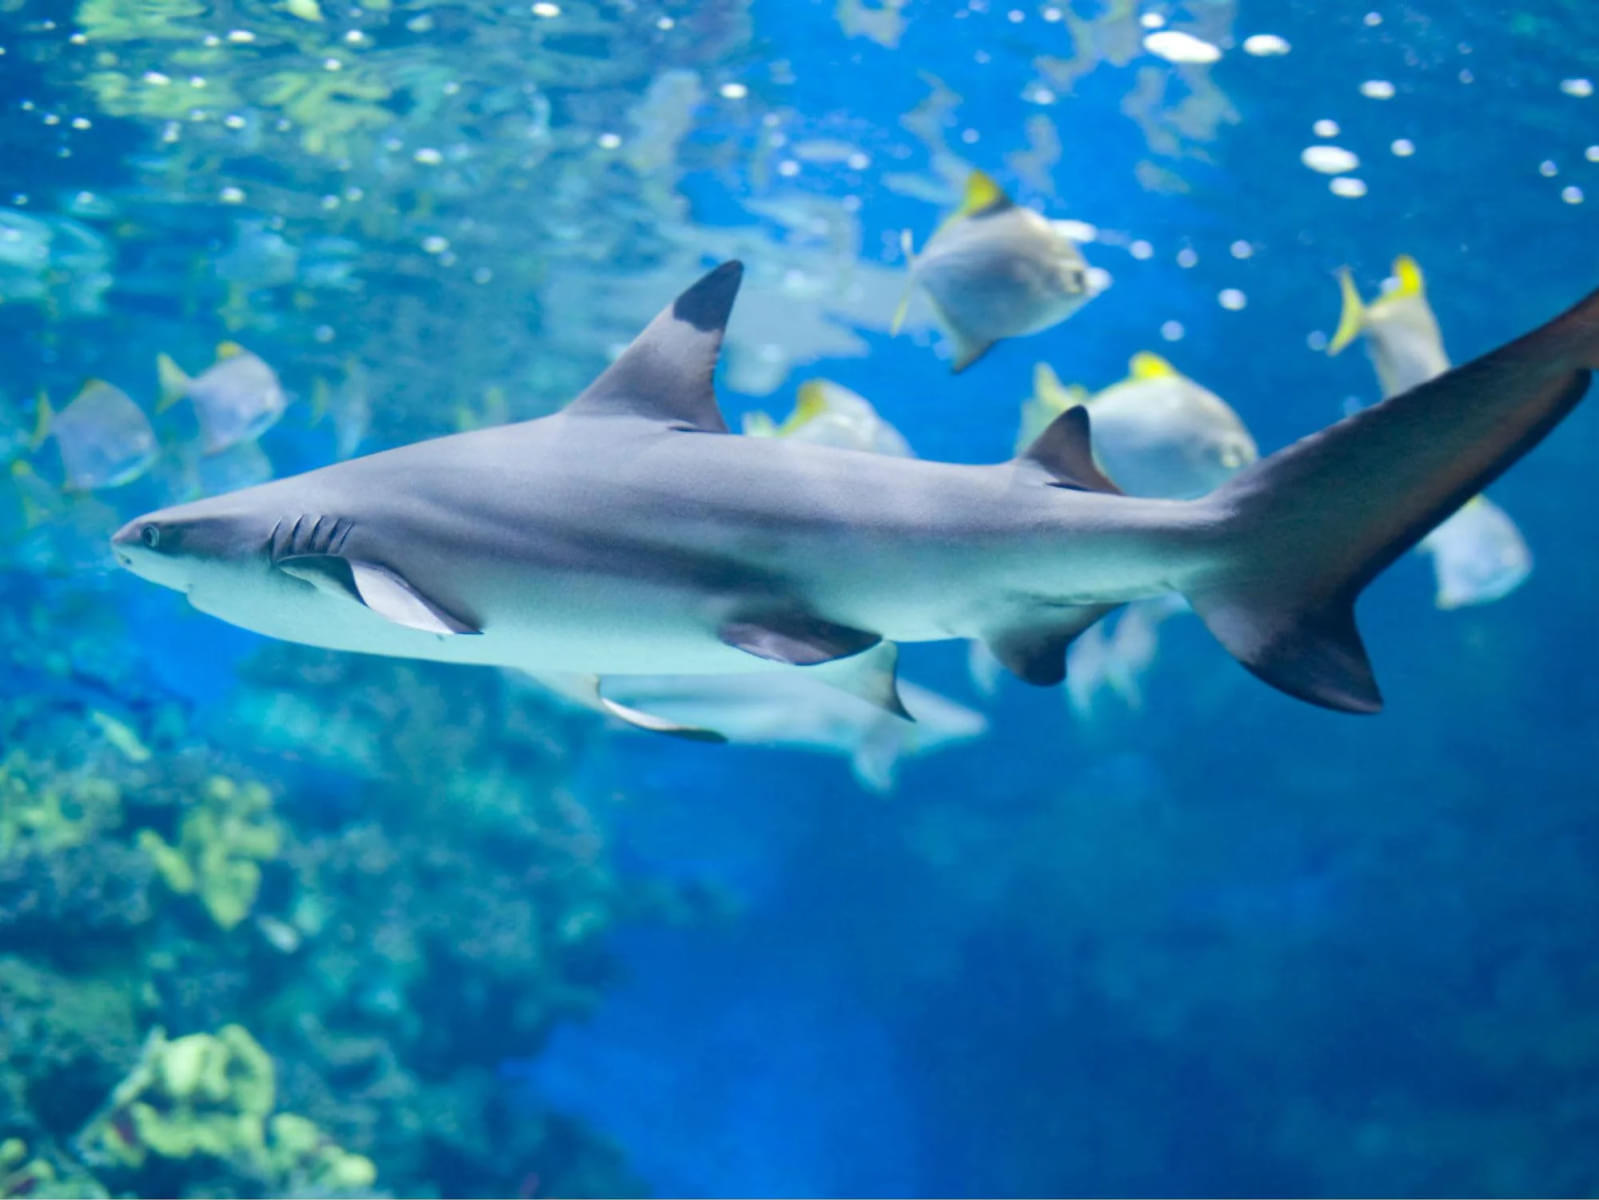 Get up and close to the majestic sharks